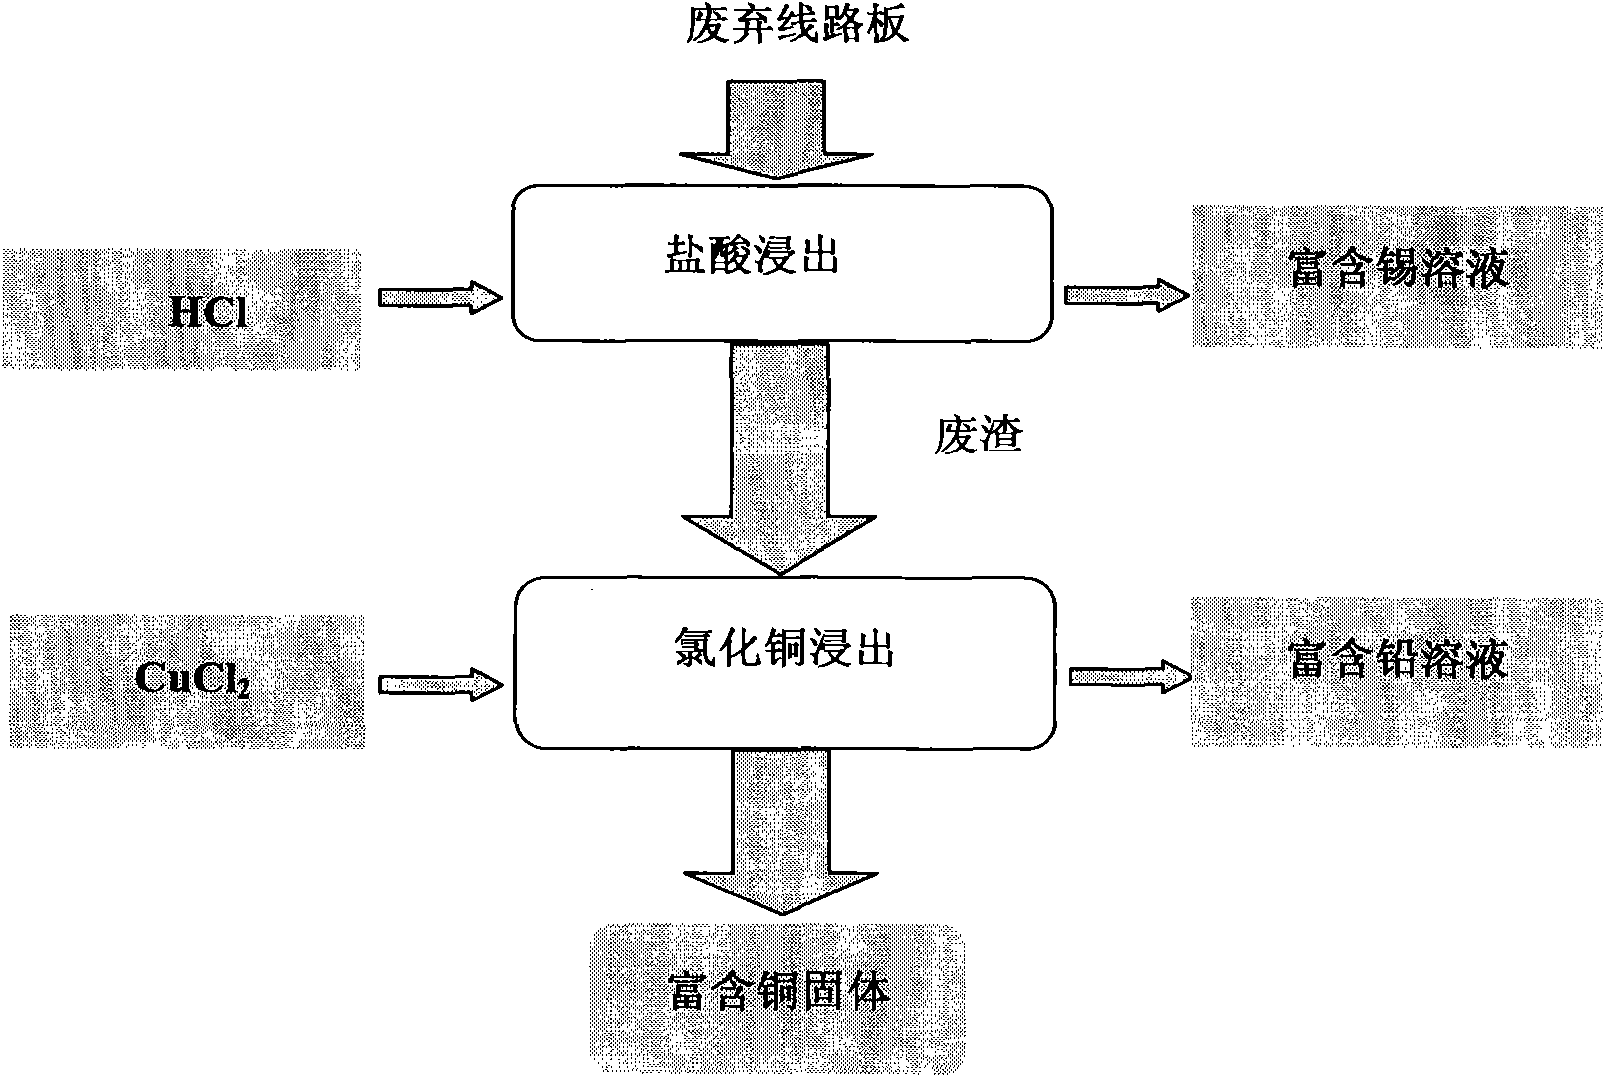 Method for selectively leaching and separating tin, lead and copper from waste circuit board